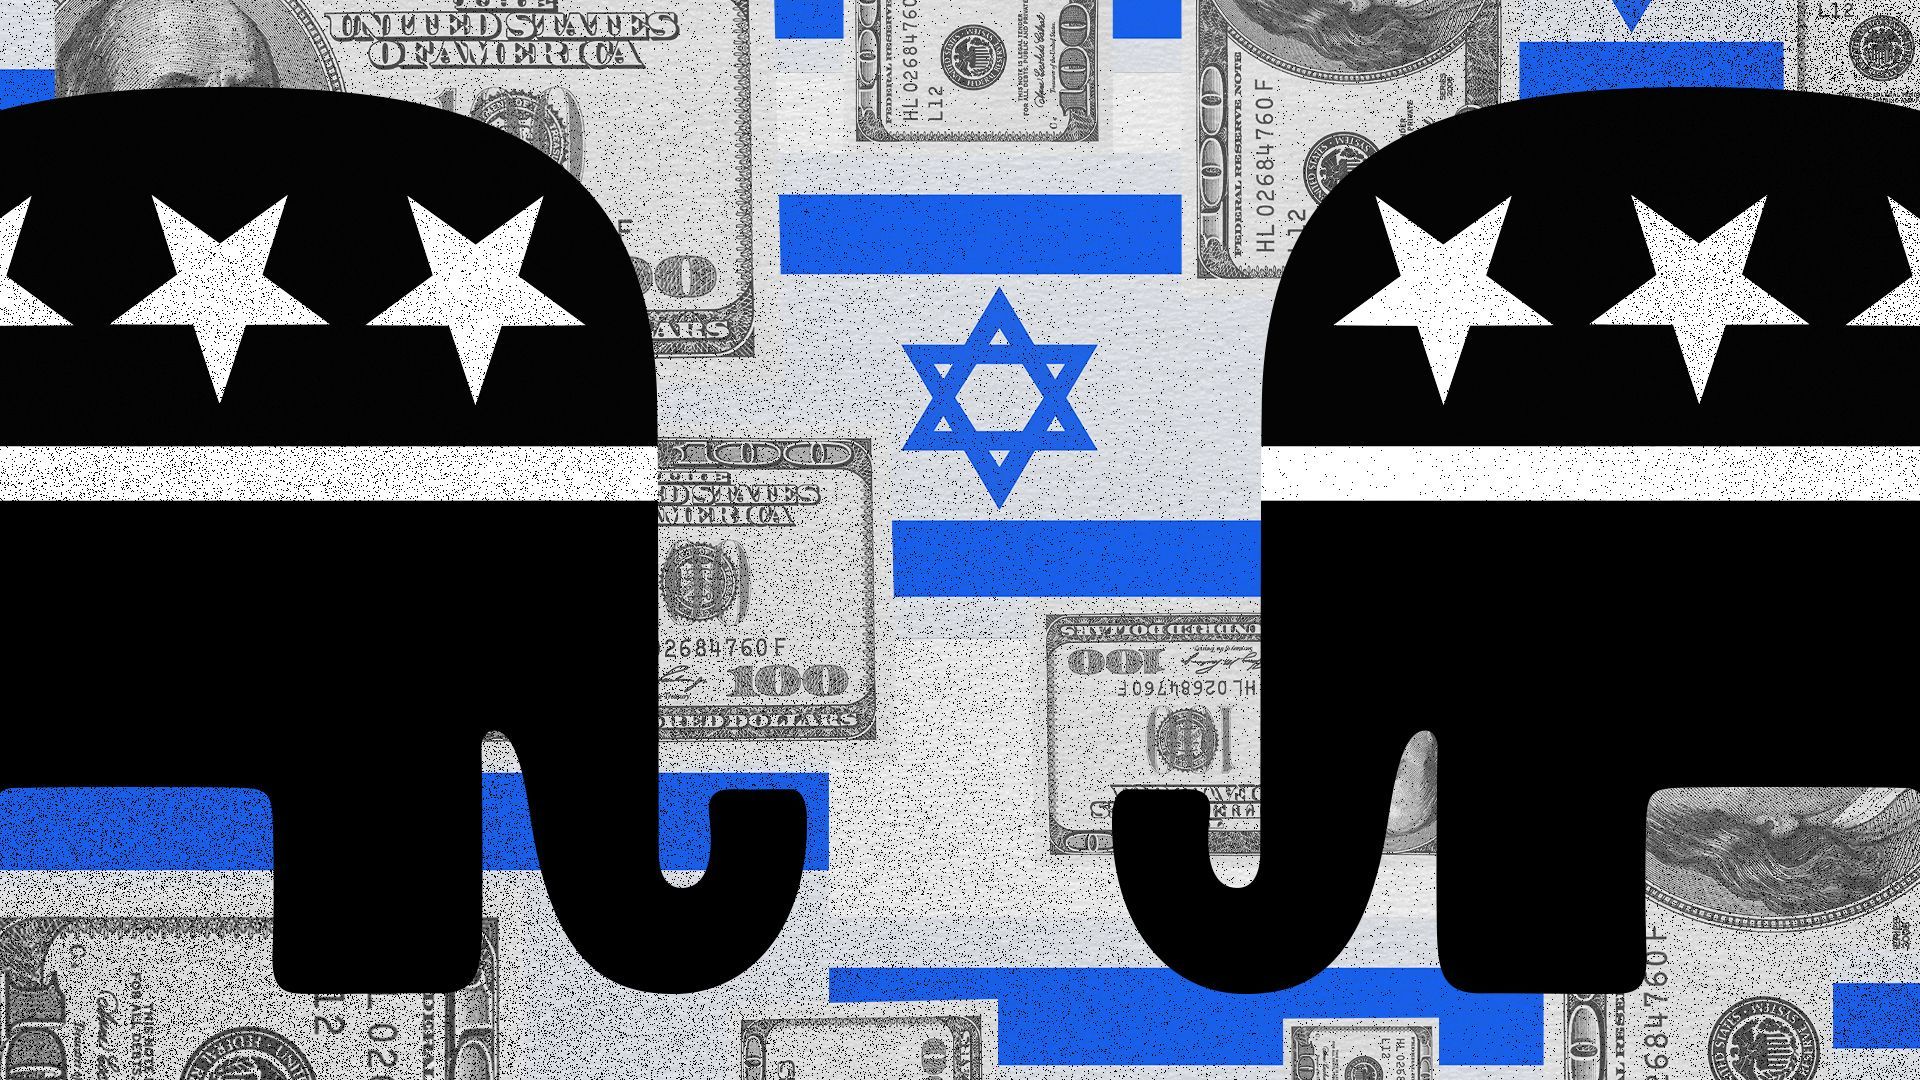 Illustration collage of two republican elephant symbols facing each other in front of a pattern of Israel flags and U.S. one hundred dollar bills.